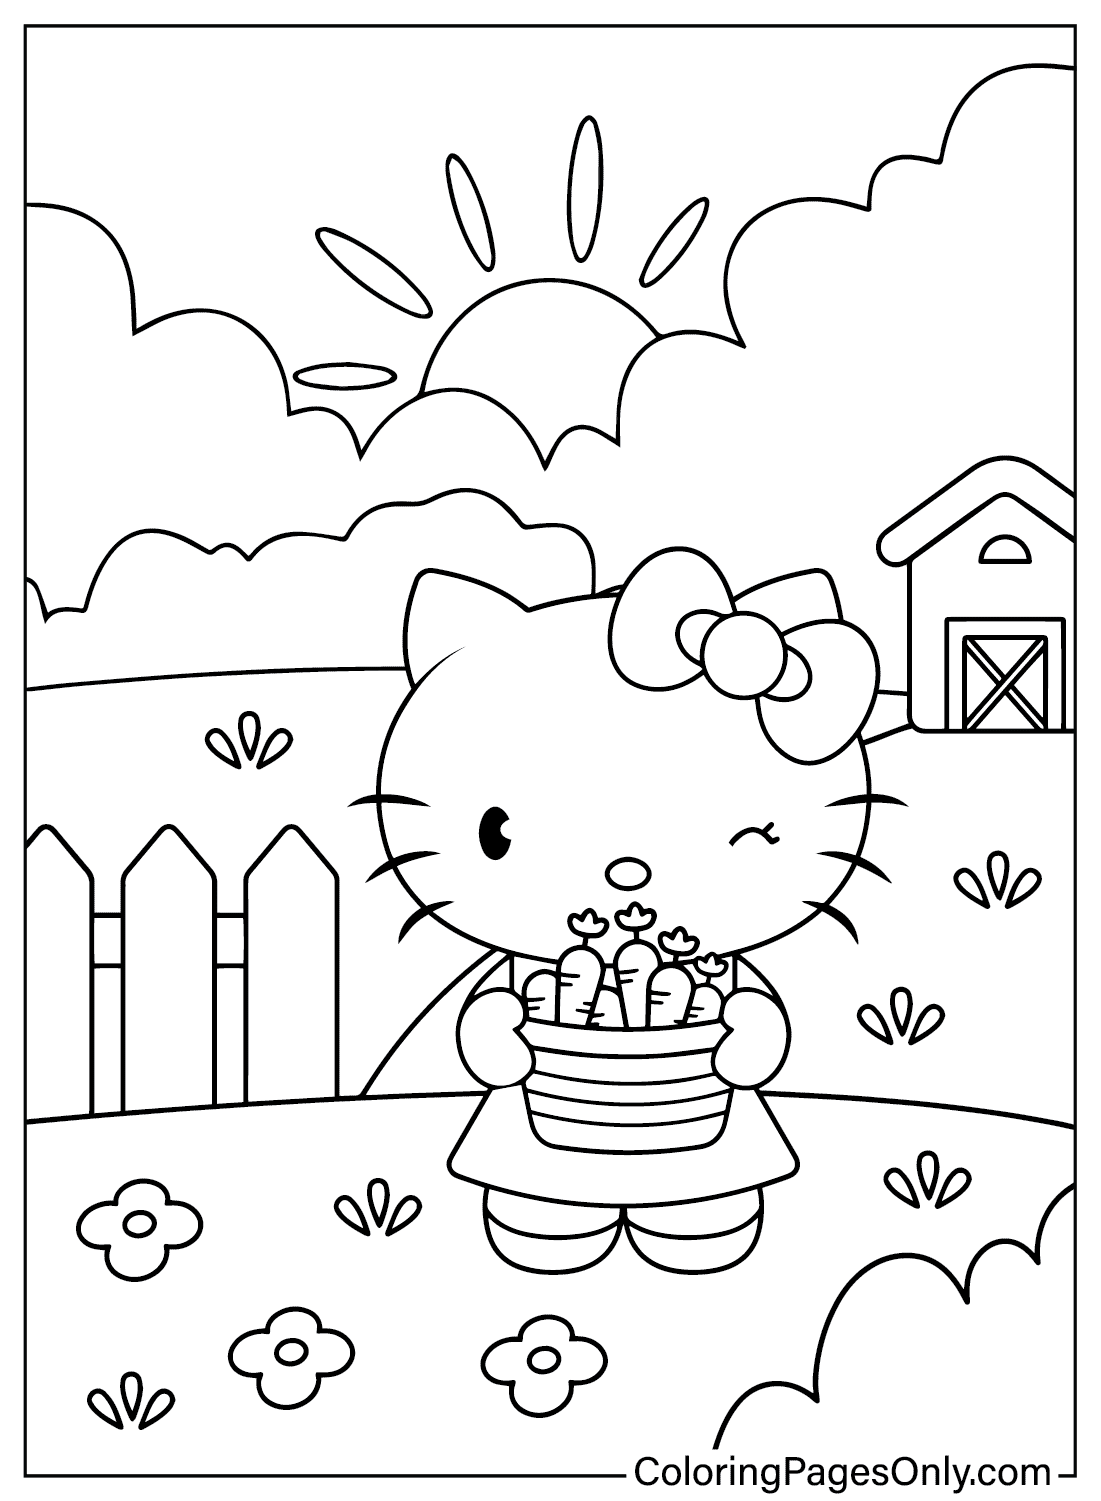 Hello Kitty Pictures to Color